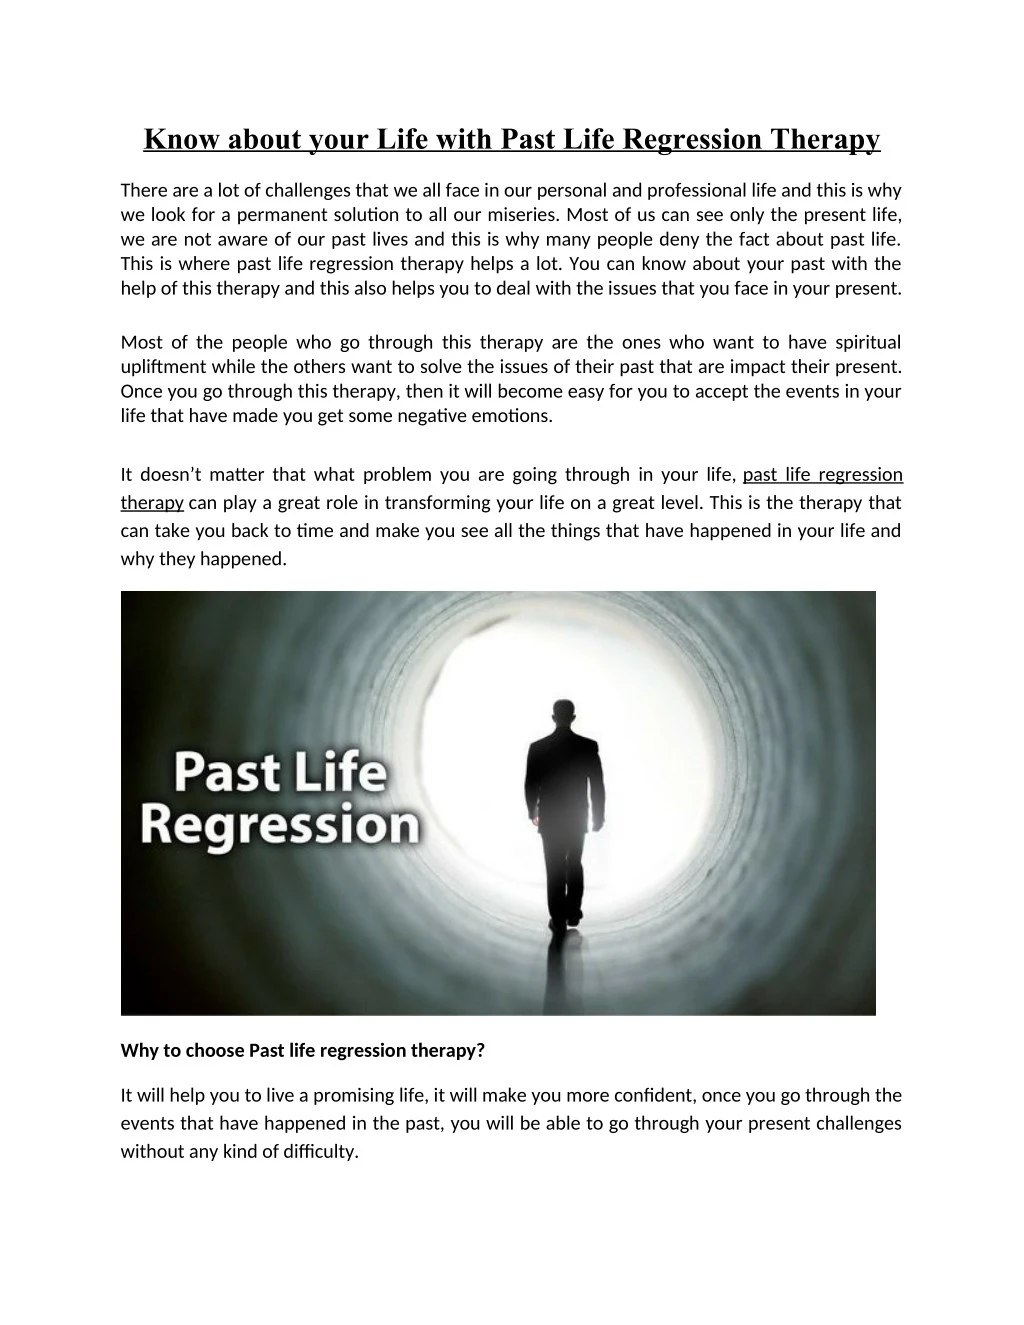 know about your life with past life regression